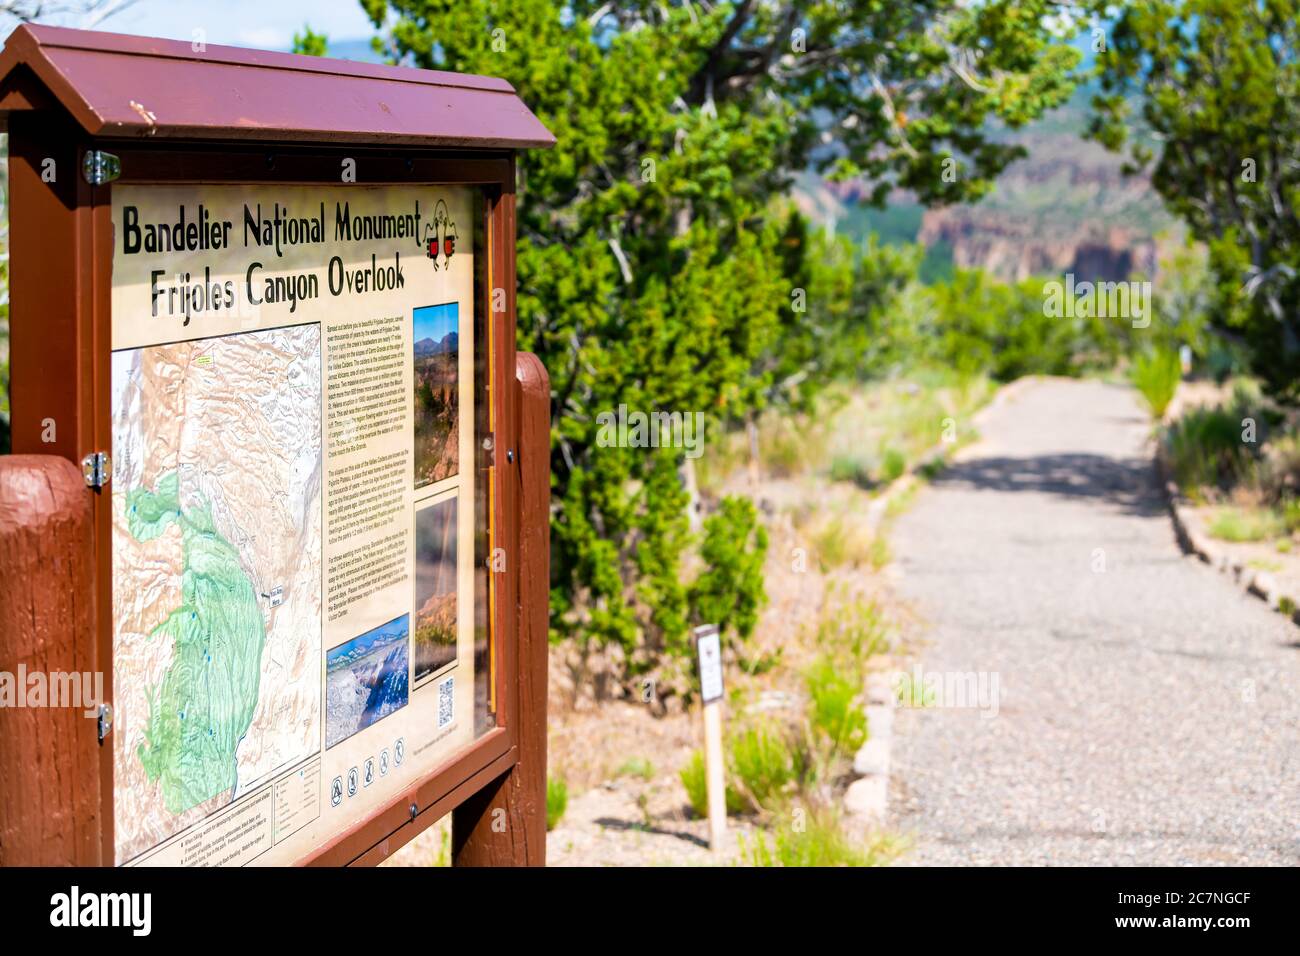 Santa Fe, USA - June 17, 2019: Information map trail sign at Main Loop path in Bandelier National Monument in New Mexico in Los Alamos and footpath Stock Photo